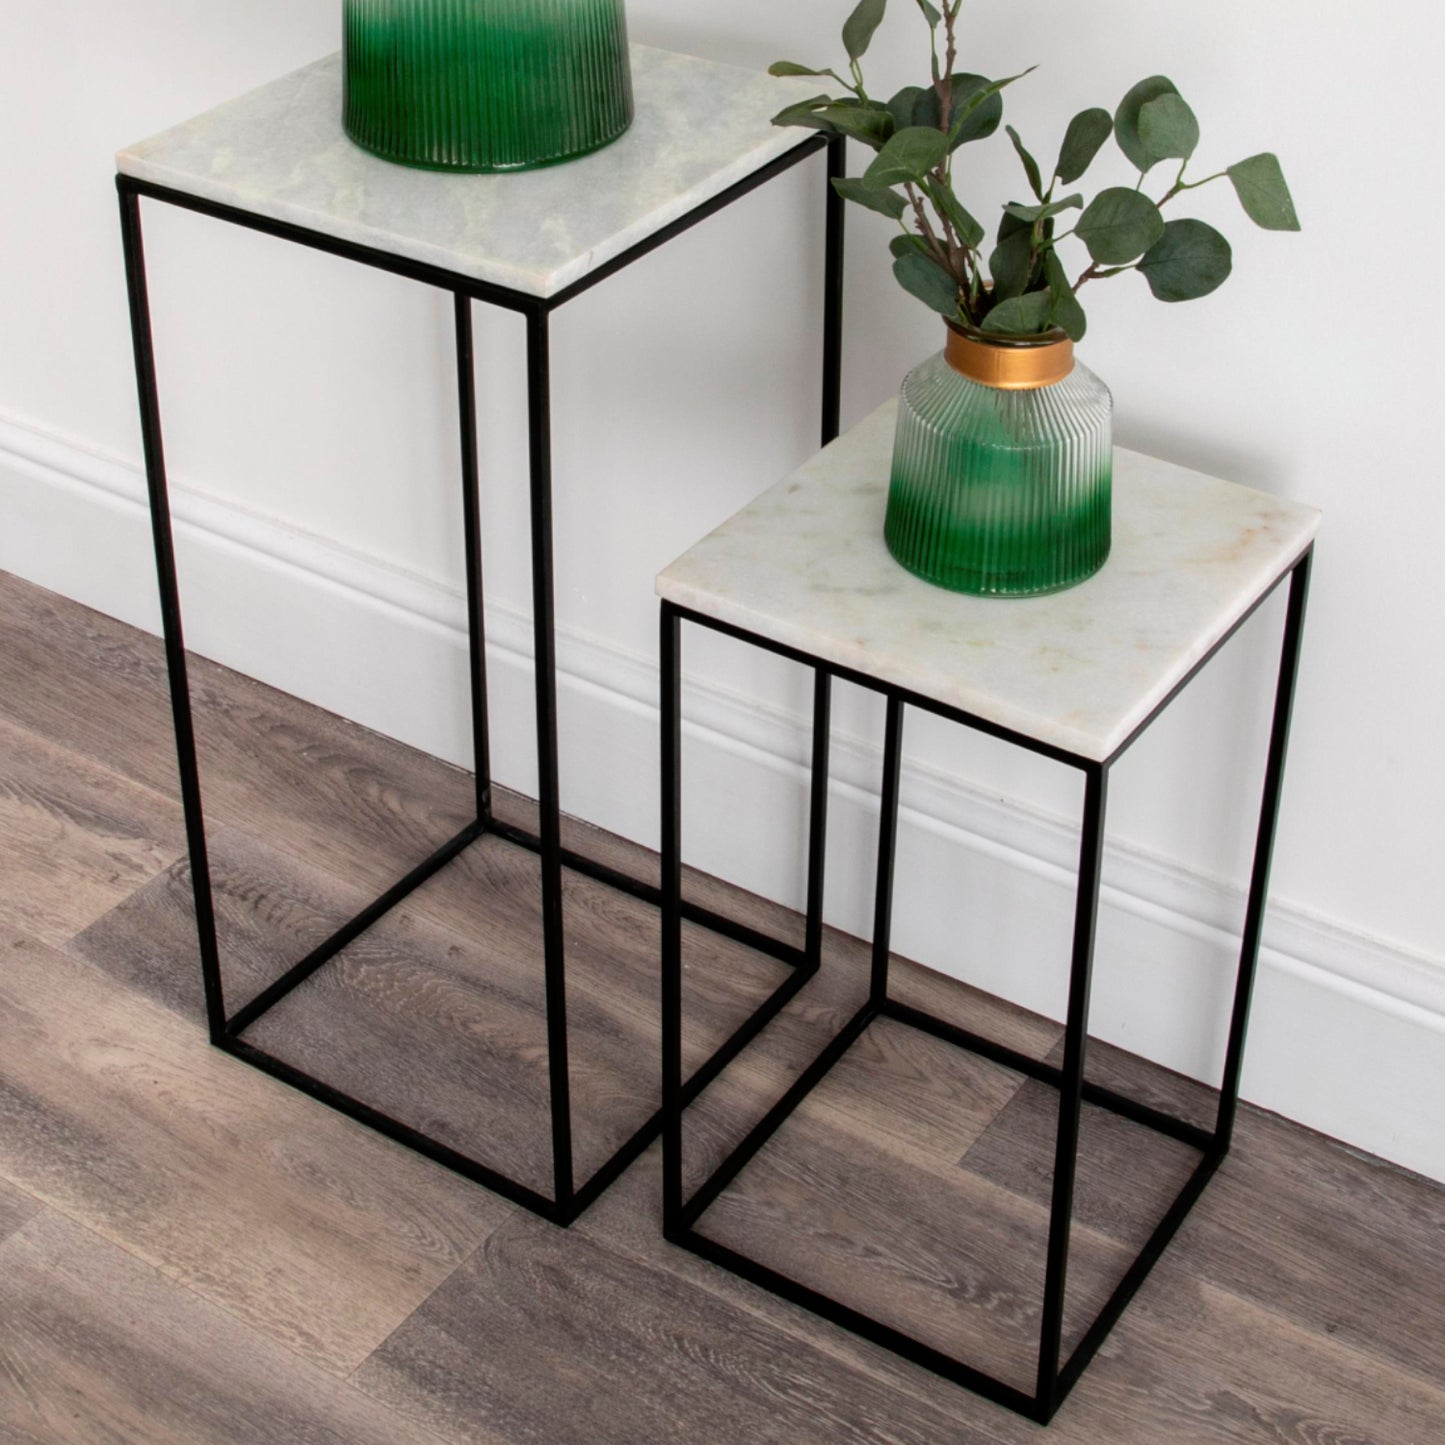 Set of two marble display tables by Native